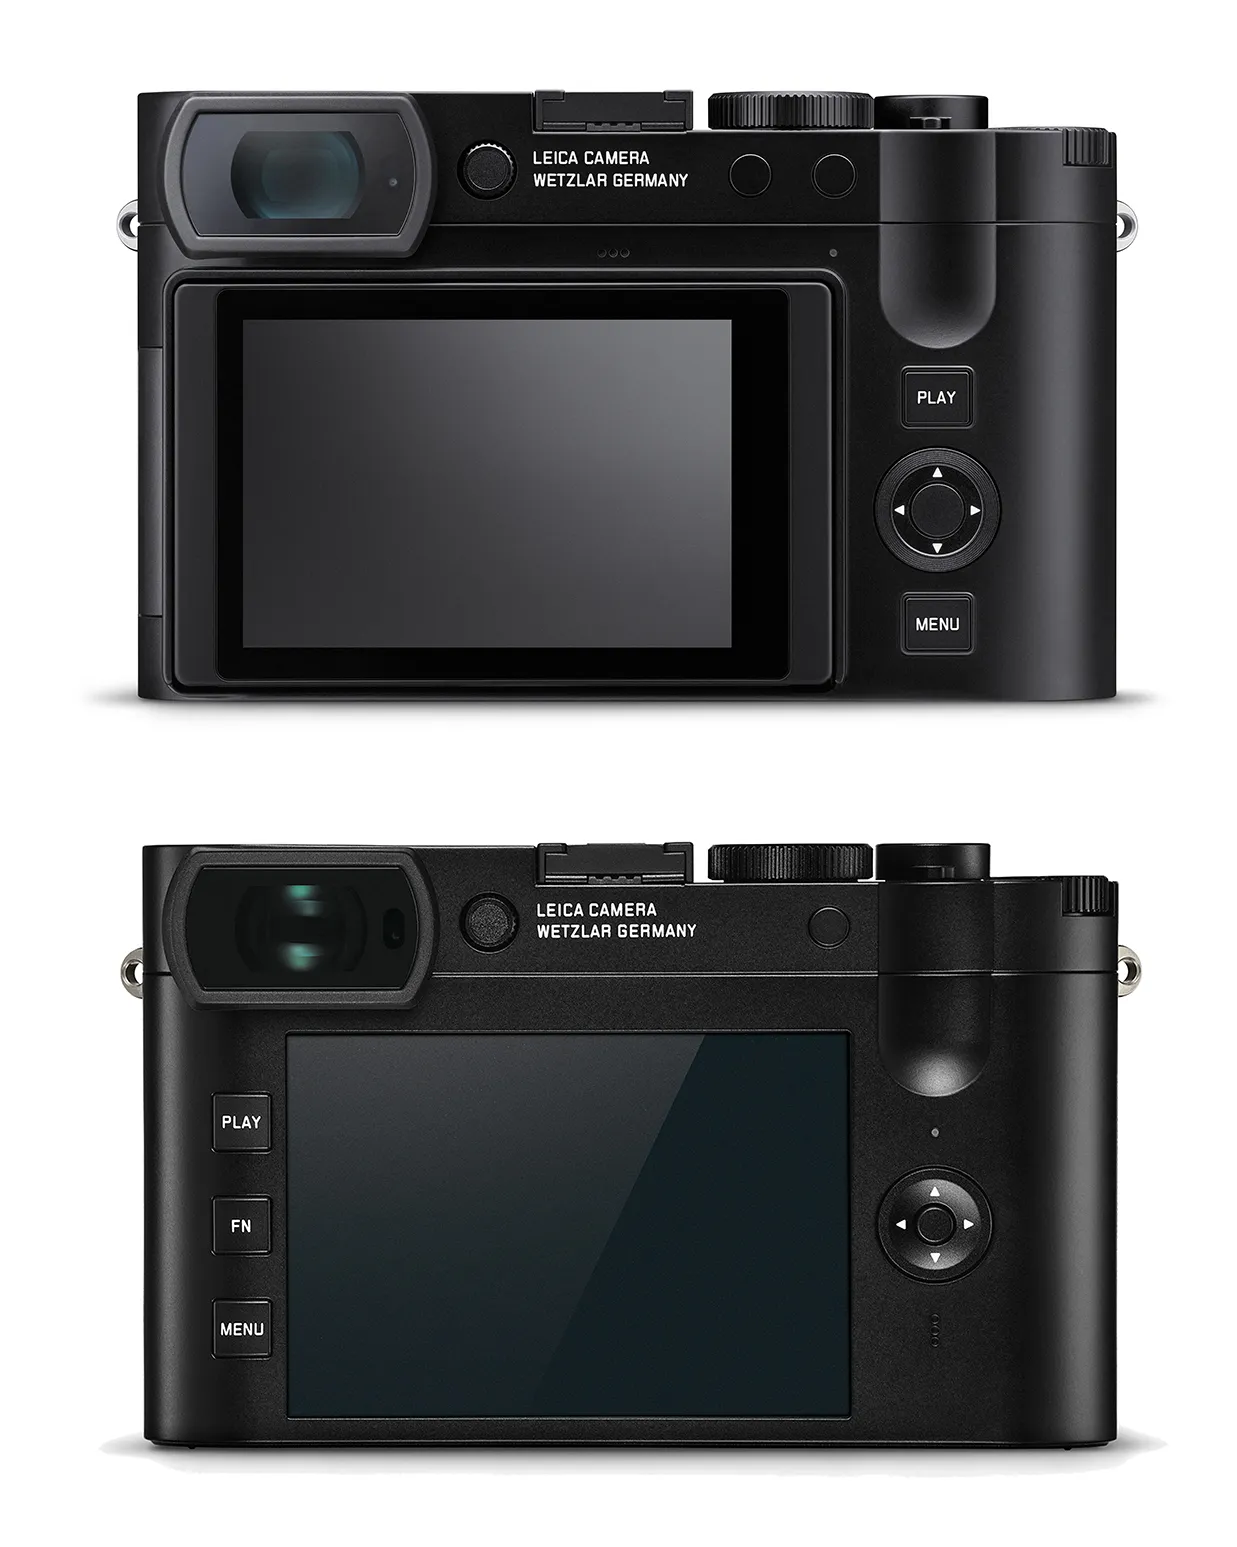 Back View of the Leica Q3 and Leica Q2